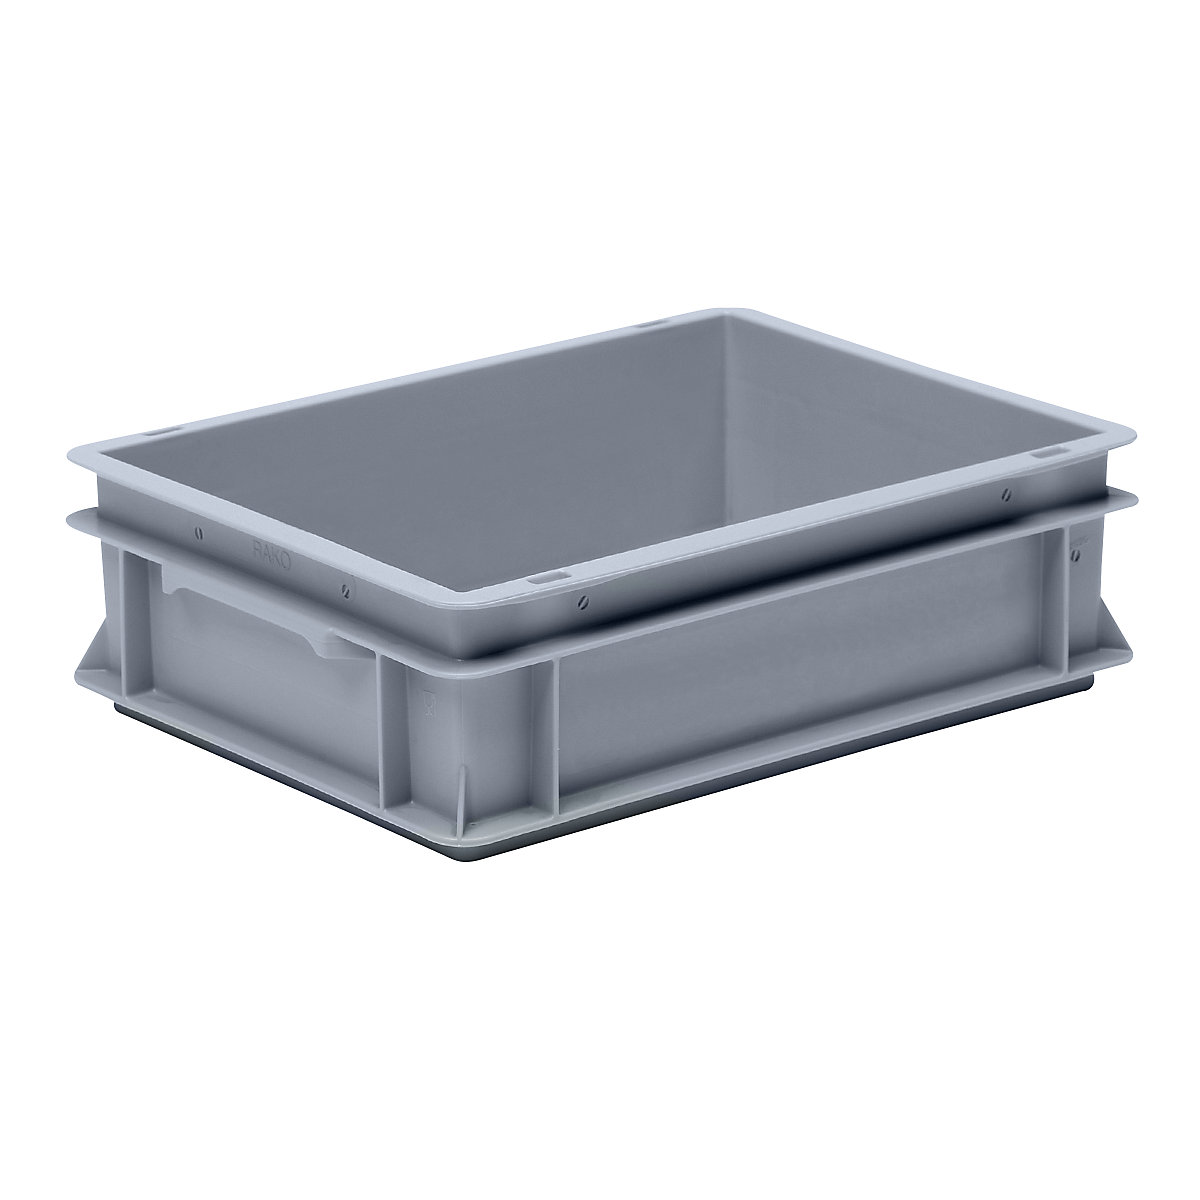 Euro stacking container made of polypropylene (PP), max. load 20 kg, silver grey, capacity 10 l, external height 120 mm, pack of 8-4